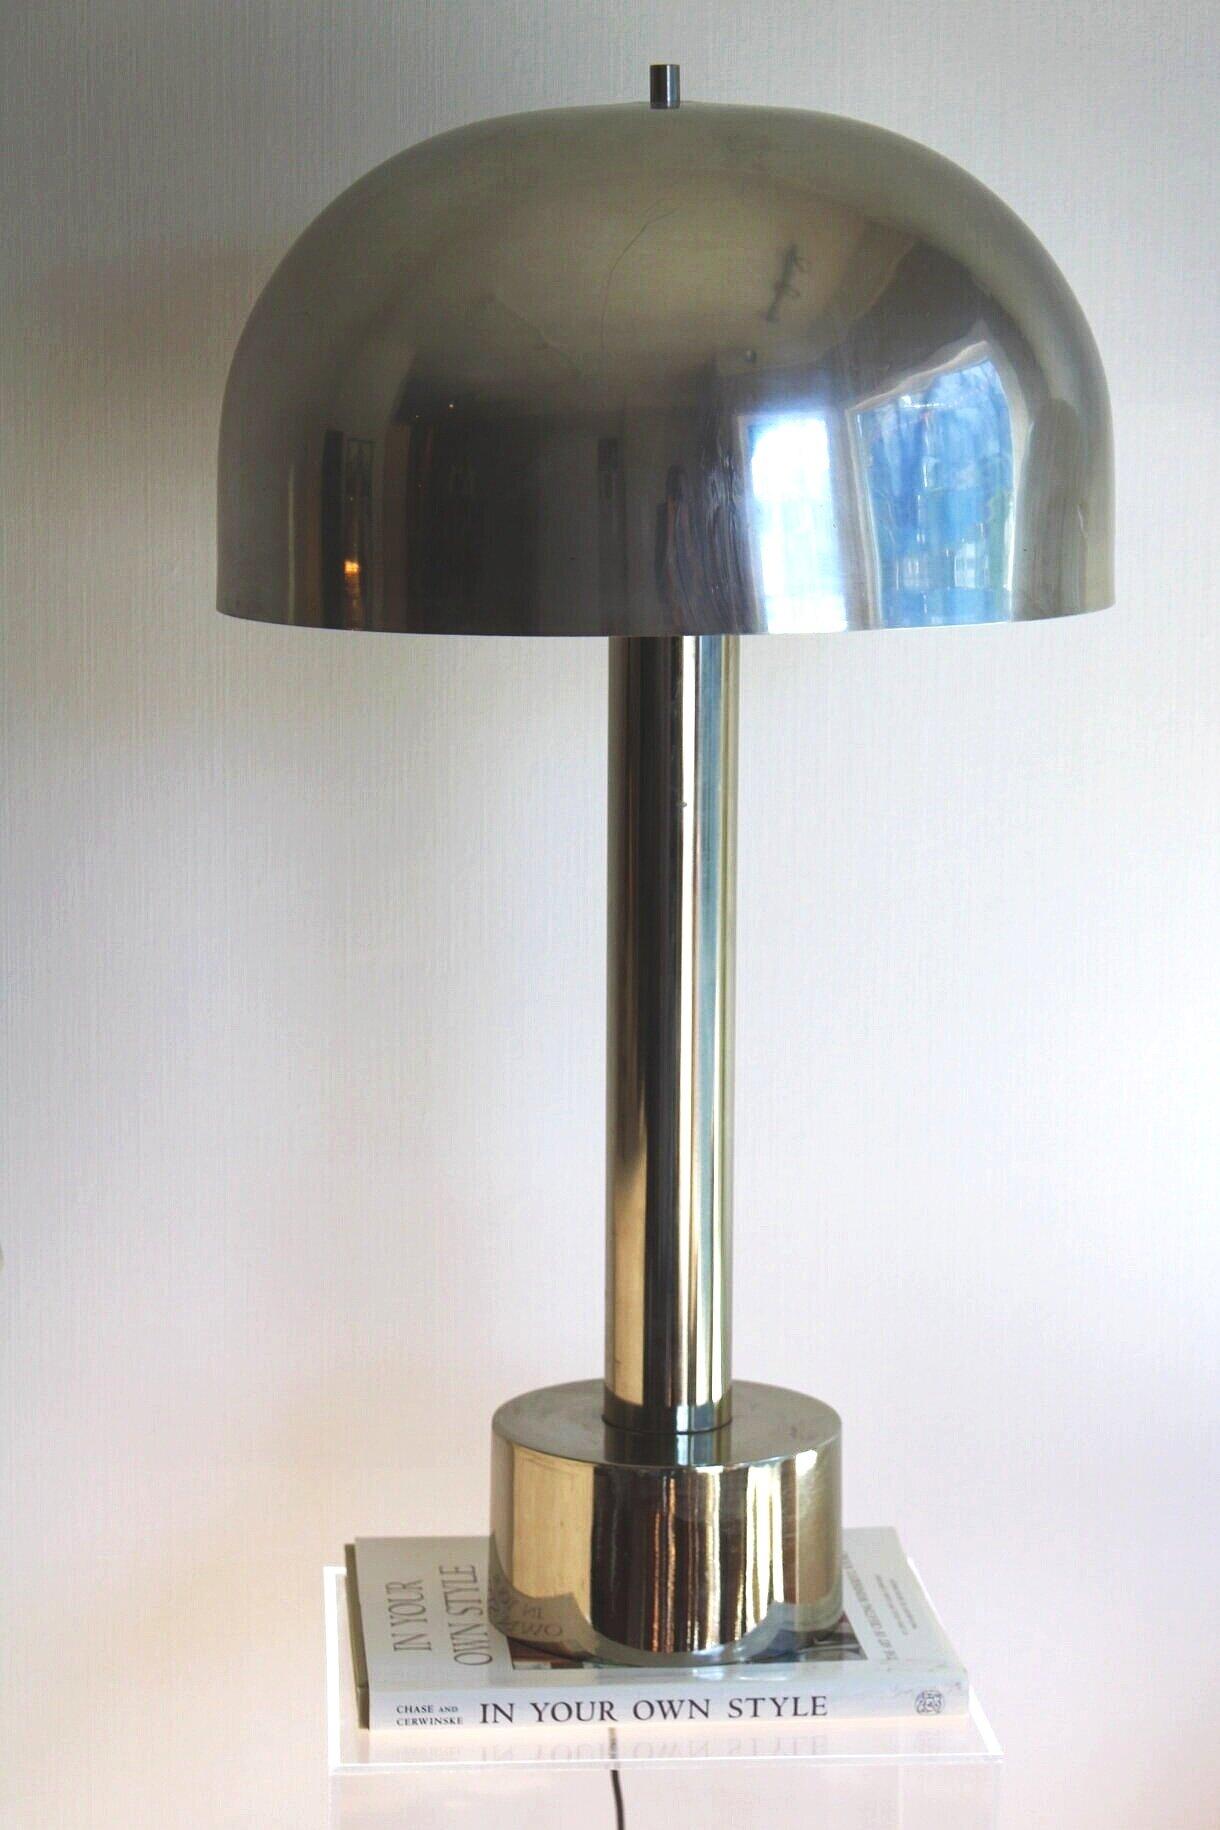 Standing 30” x 17” D x base 7.5” D.

A beautiful and iconic ‘bauhaus’ inspired 1980s oversized mushroom chrome lamp for Laurel by Robert Sonneman.

In very good condition. Patina and scuff marks, scratches are consistent with age and time. The